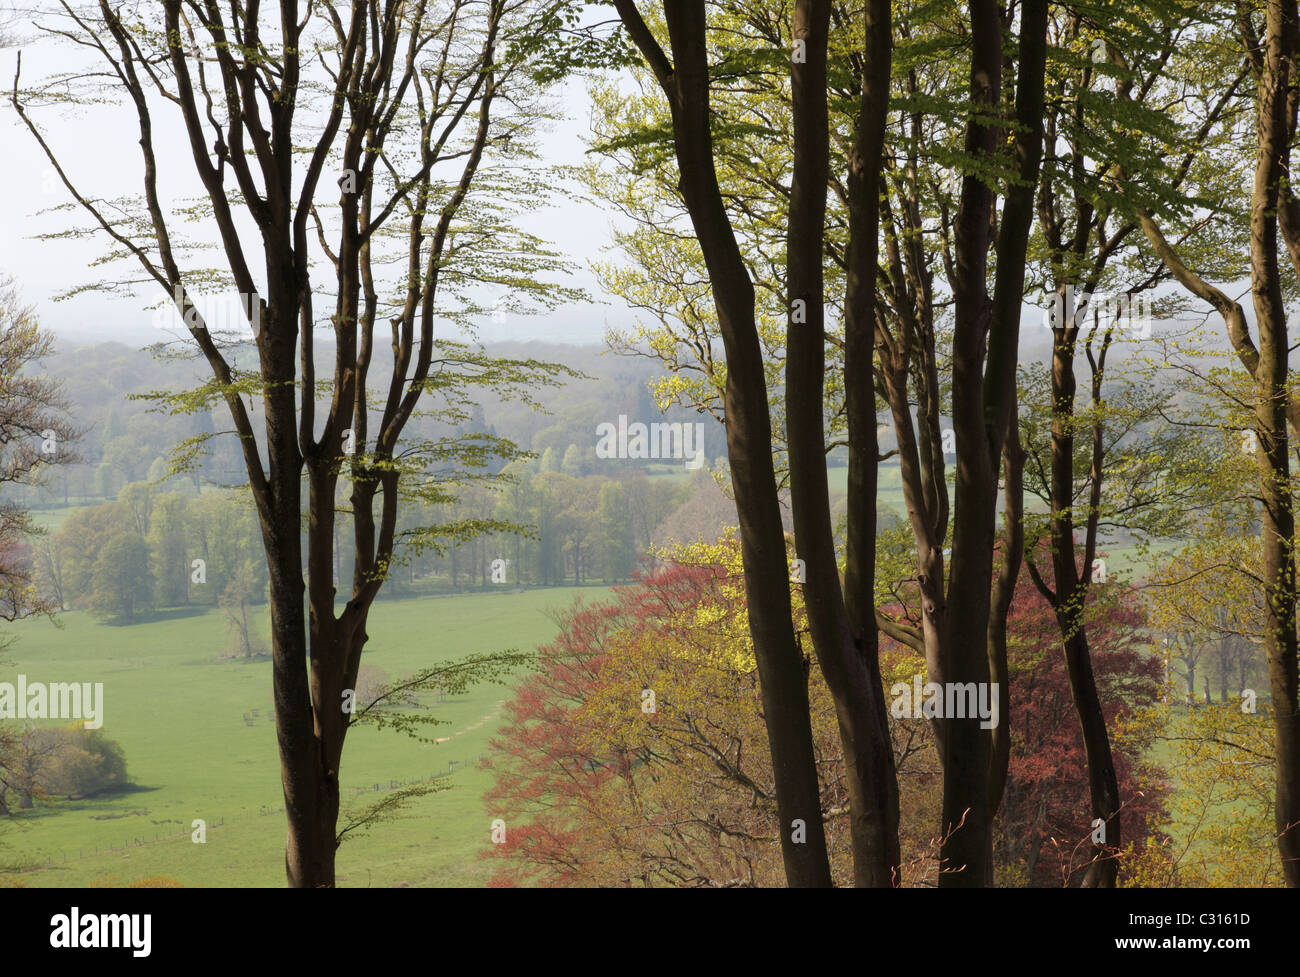 View from Heavens Gate across the Longleat Estate, Warminster, Wiltshire, England, UK Stock Photo